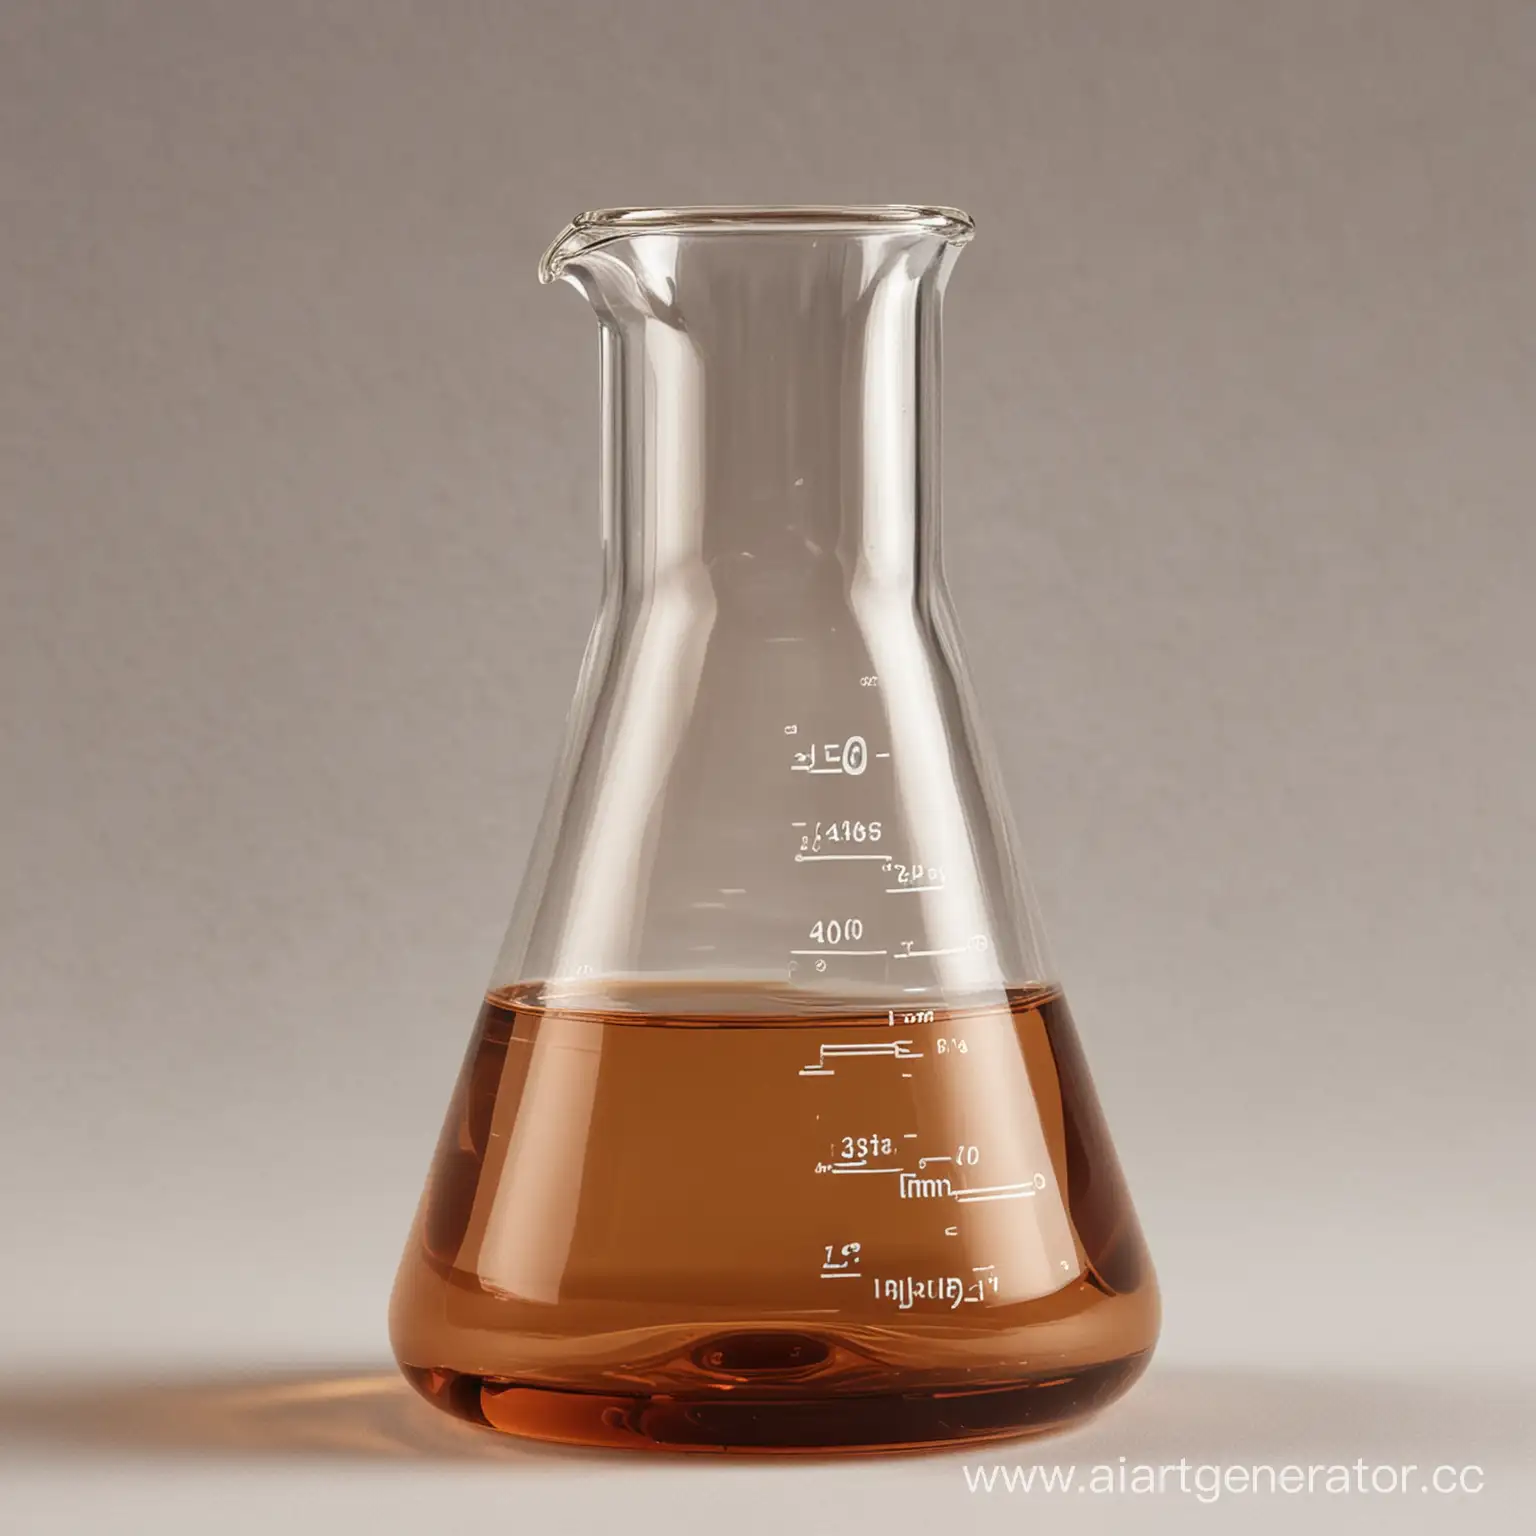 Chemistry-Experiment-Conical-Flask-with-Brown-Liquid